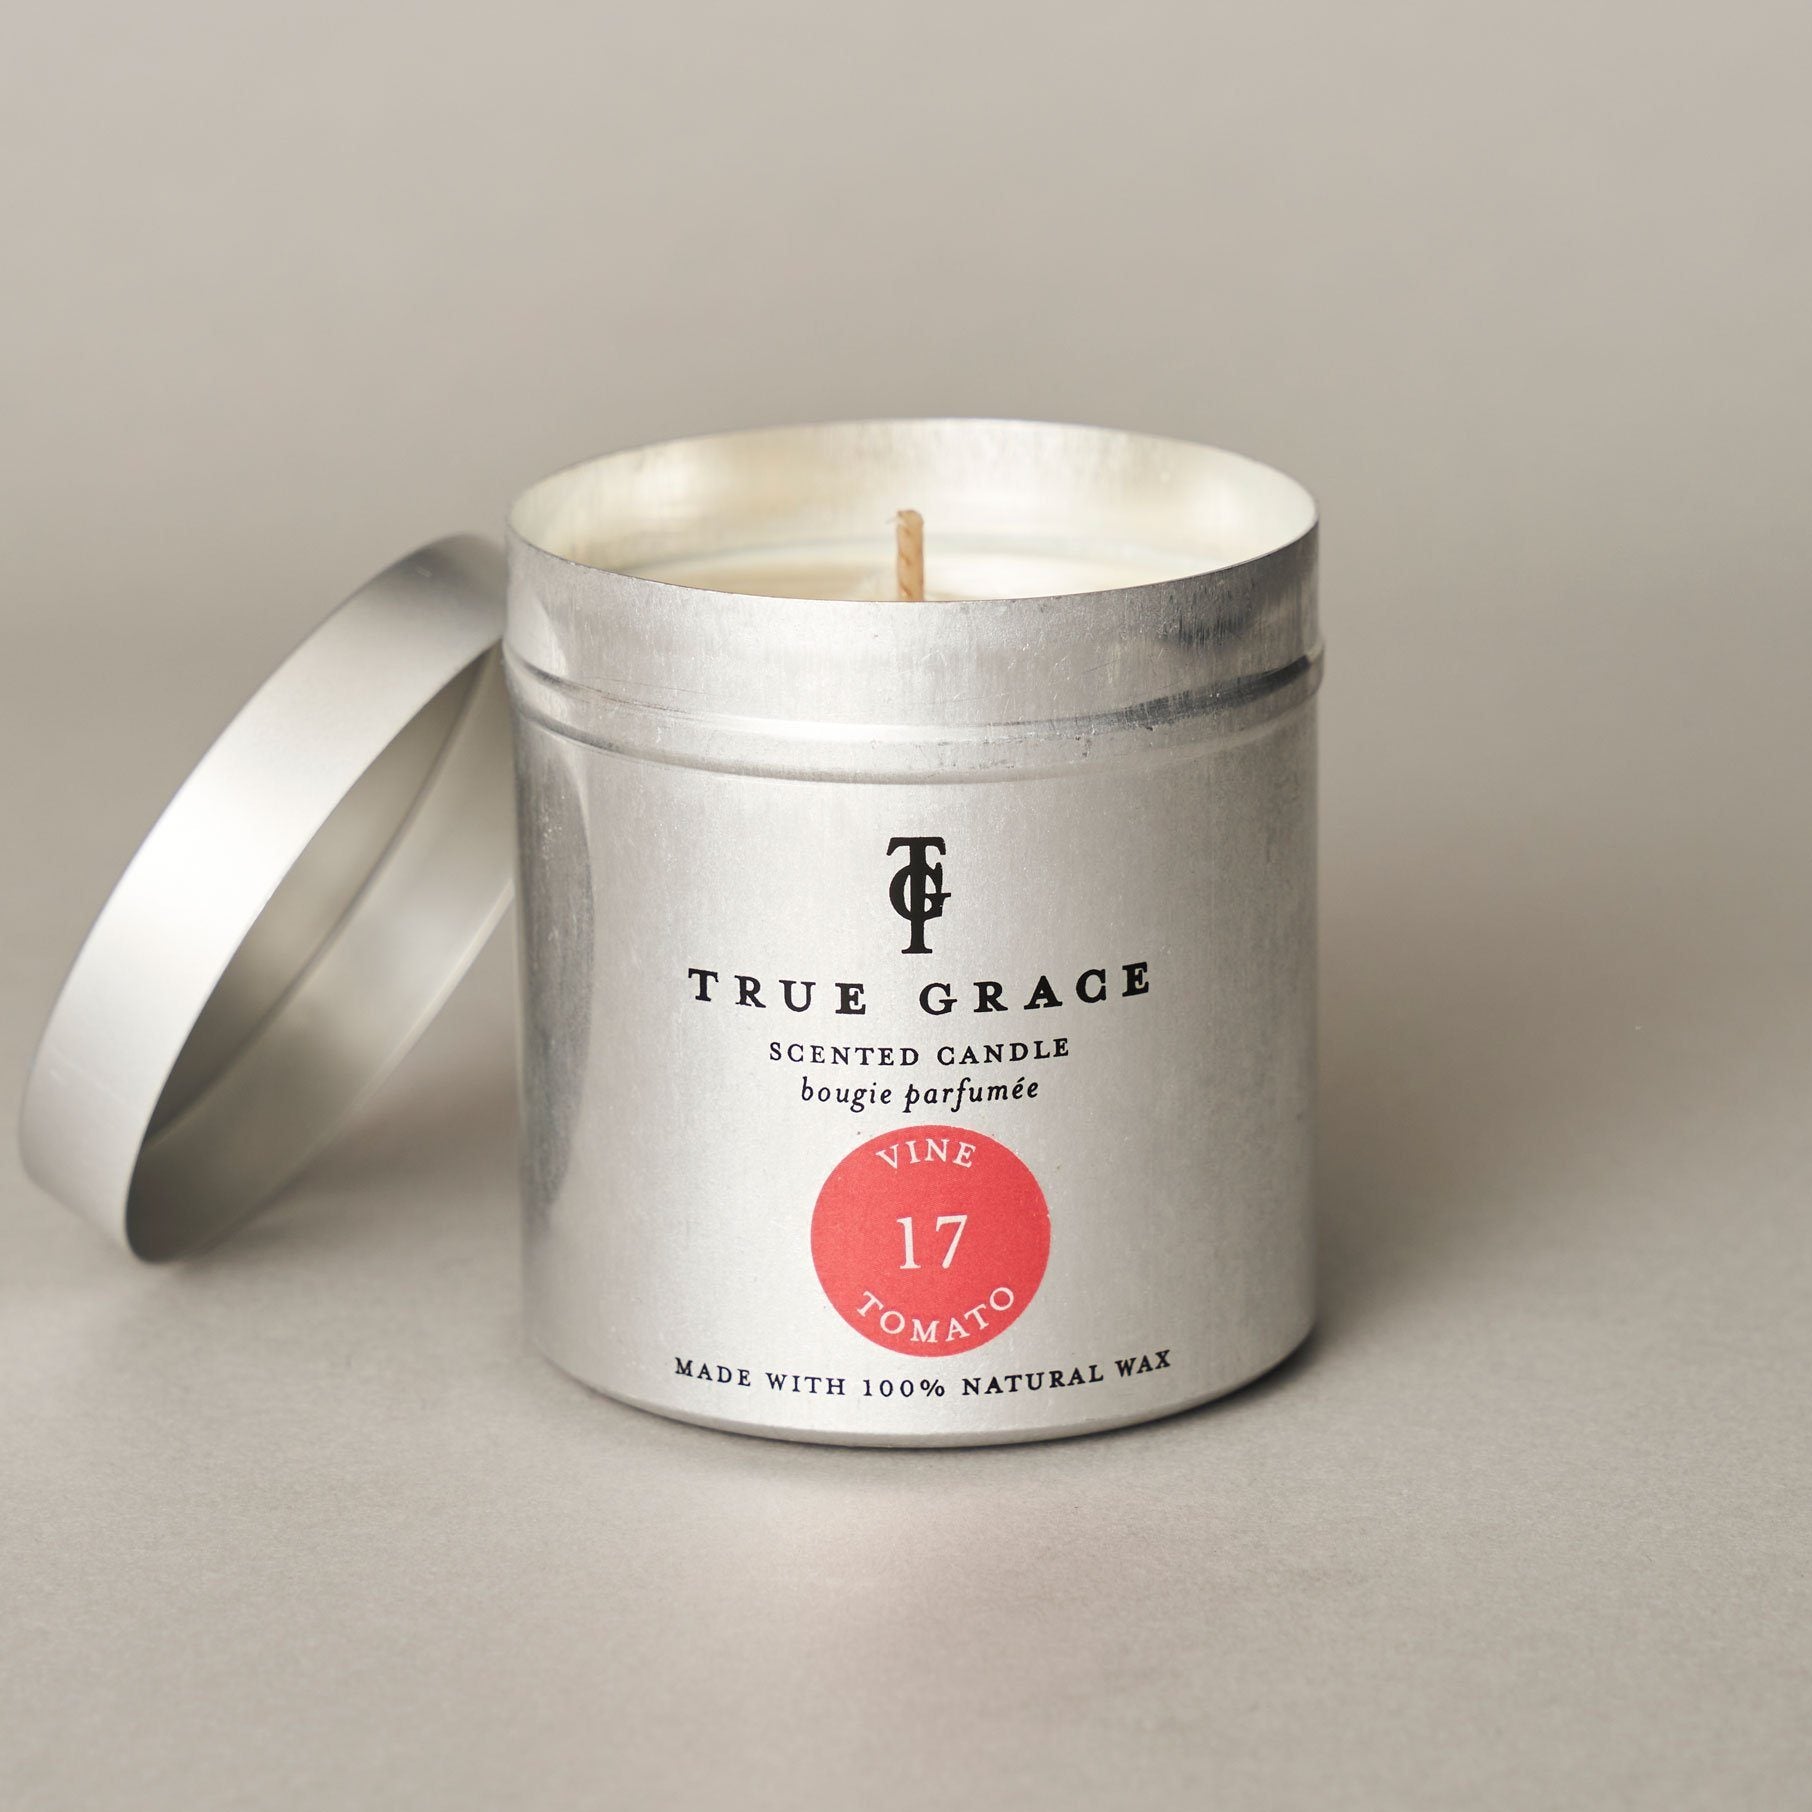 Walled Garden Tinned Candle Scented Candle Henderson's Vine Tomato 